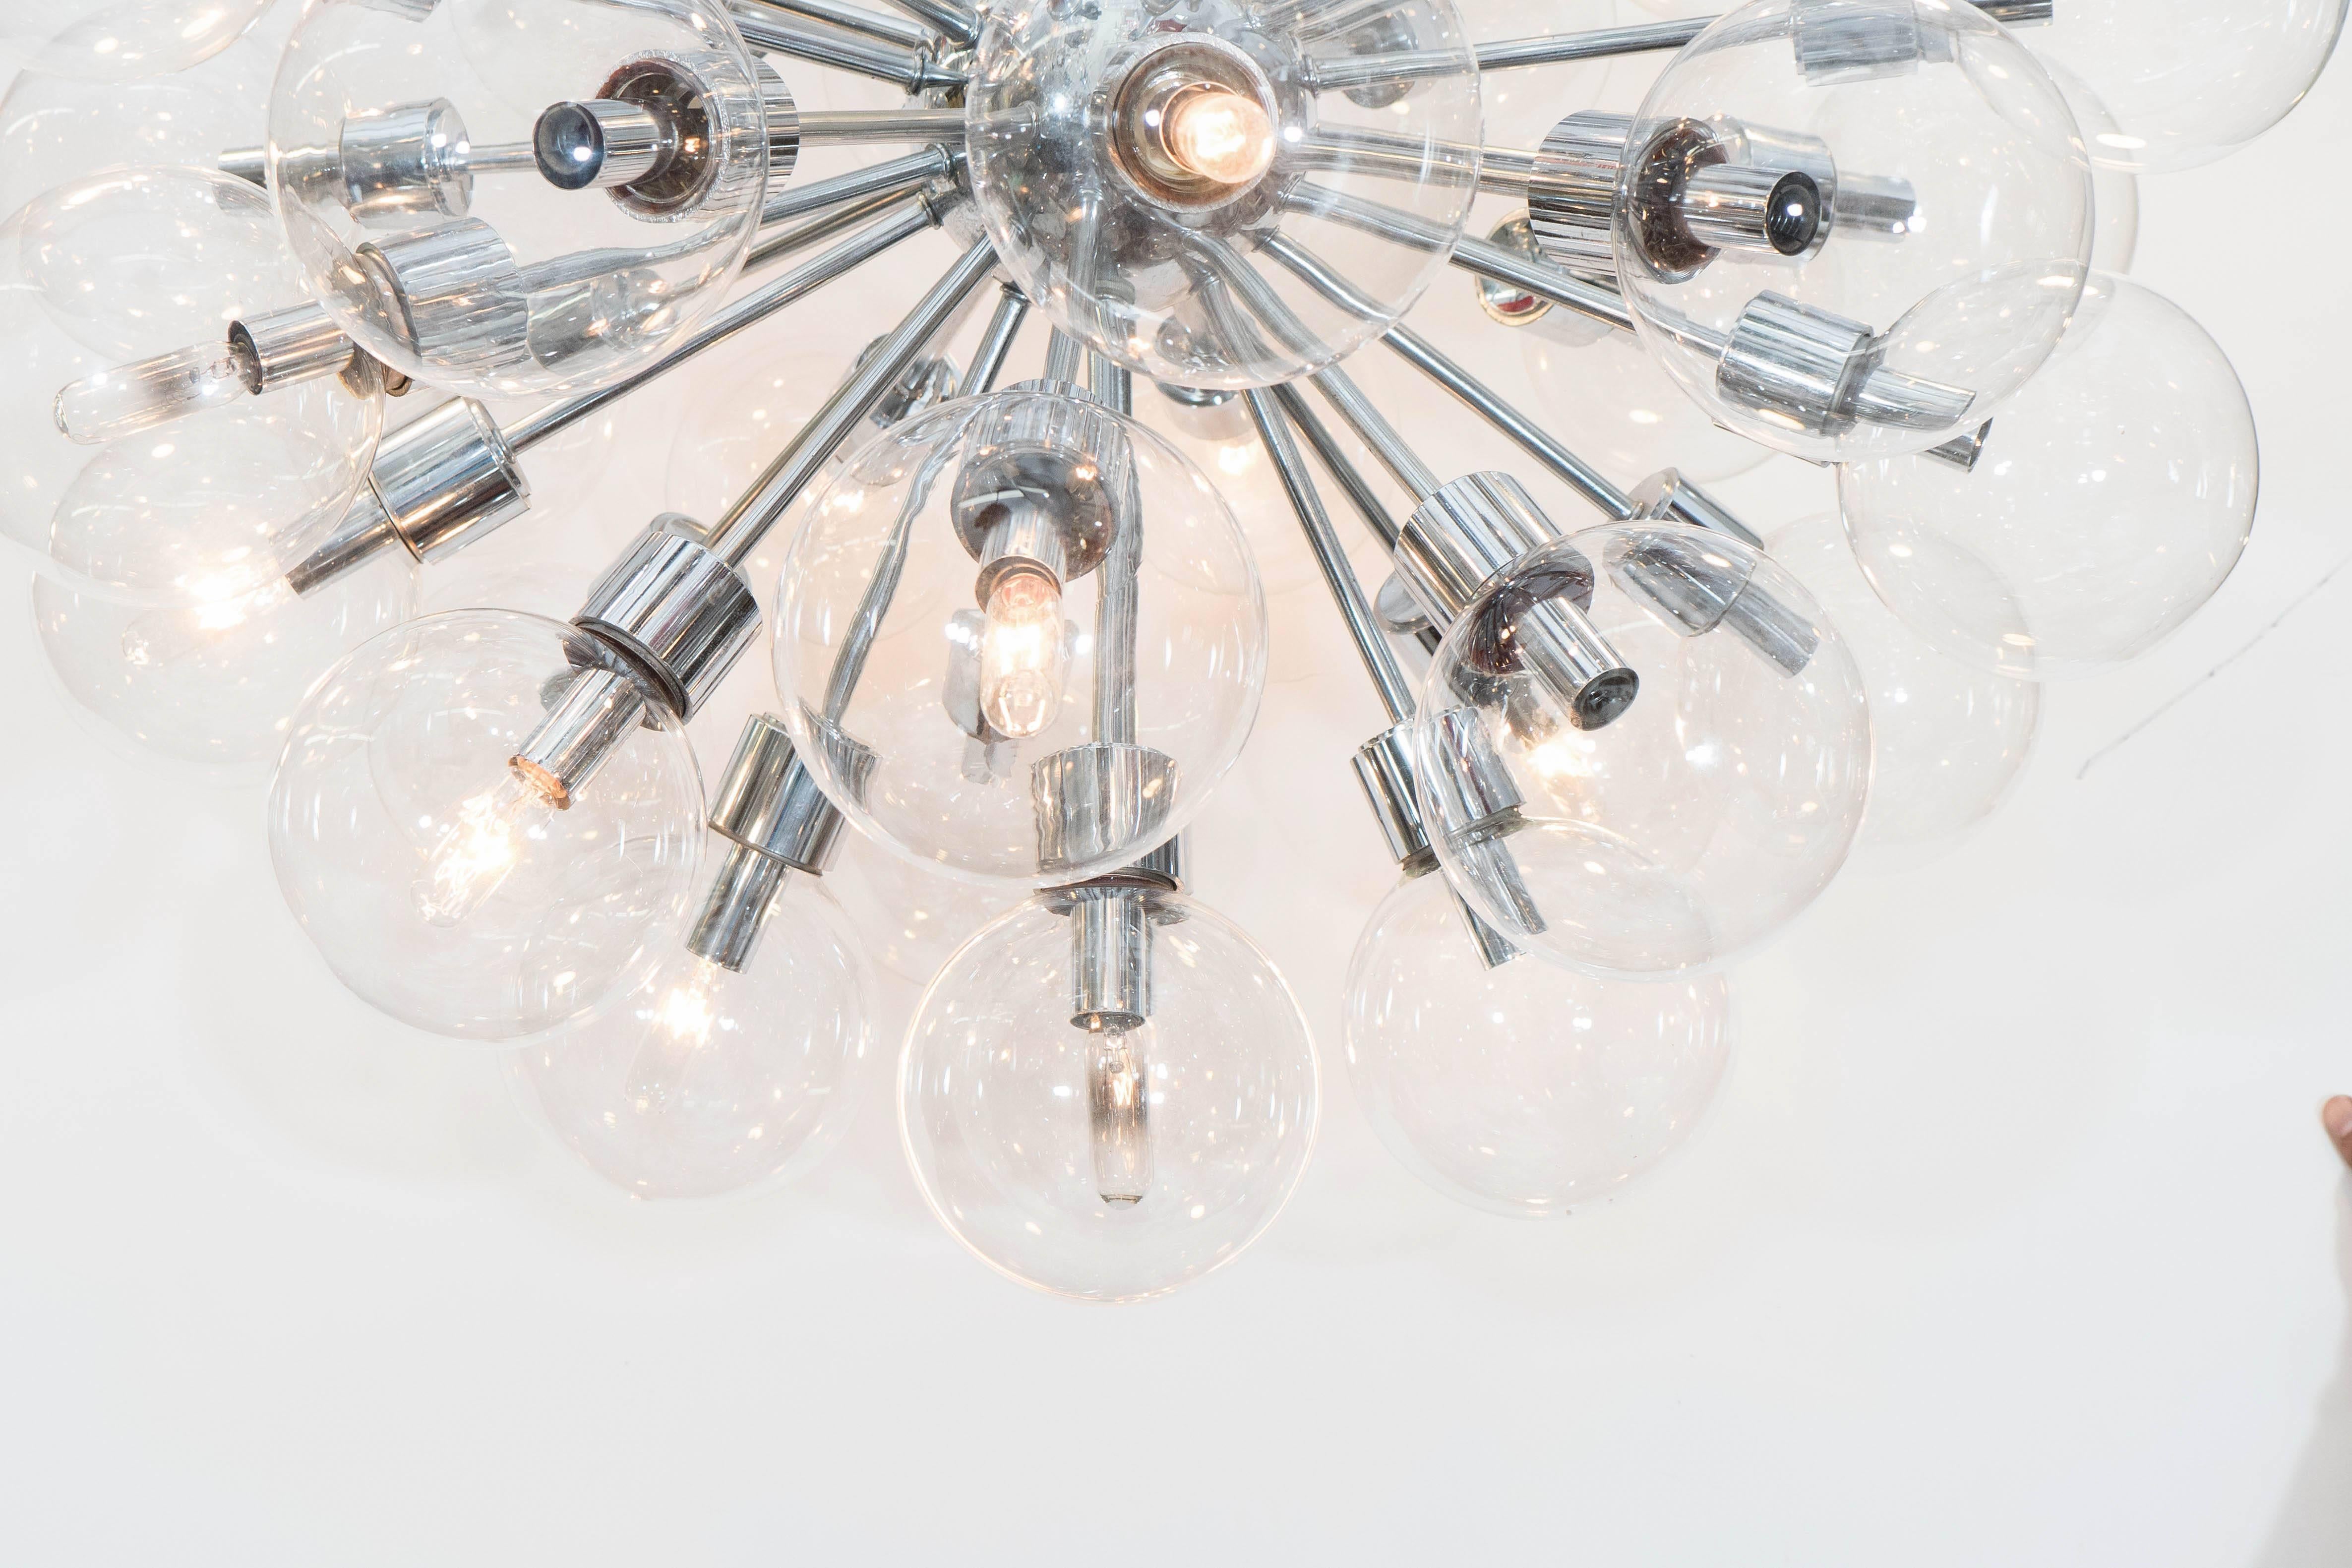 A large-scale chrome frame Sputnik chandelier, produced circa 1960s by Lightolier, with surrounding glass globe shades, radiating from a central nucleus. Very good vintage condition, consistent with age and use.